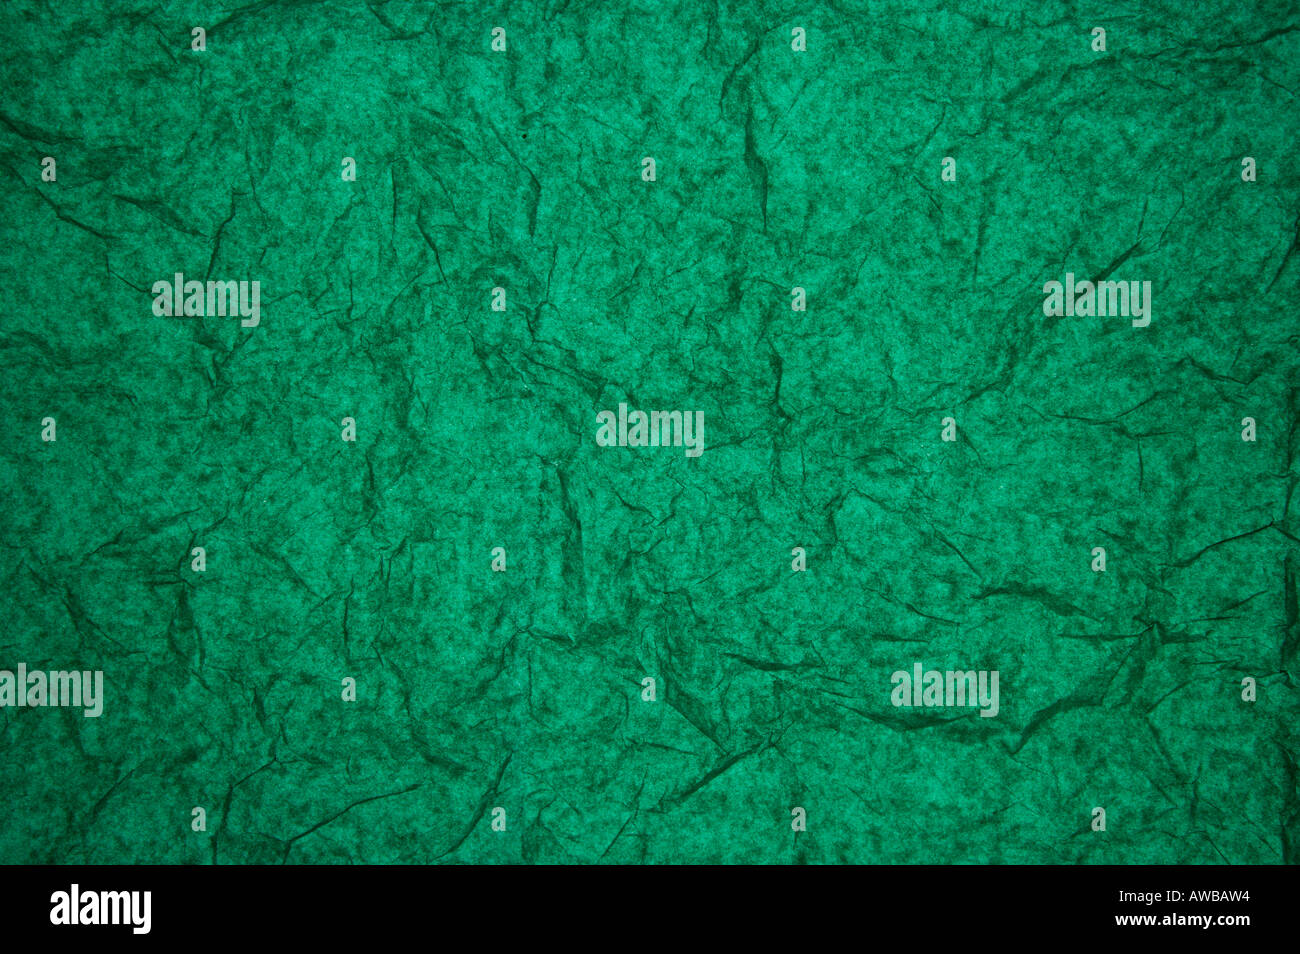 ABSTRACT RANDOM BACKGROUND OF CREASED CRUMPLED DARK EMERALD GREEN TISSUE PAPER Stock Photo